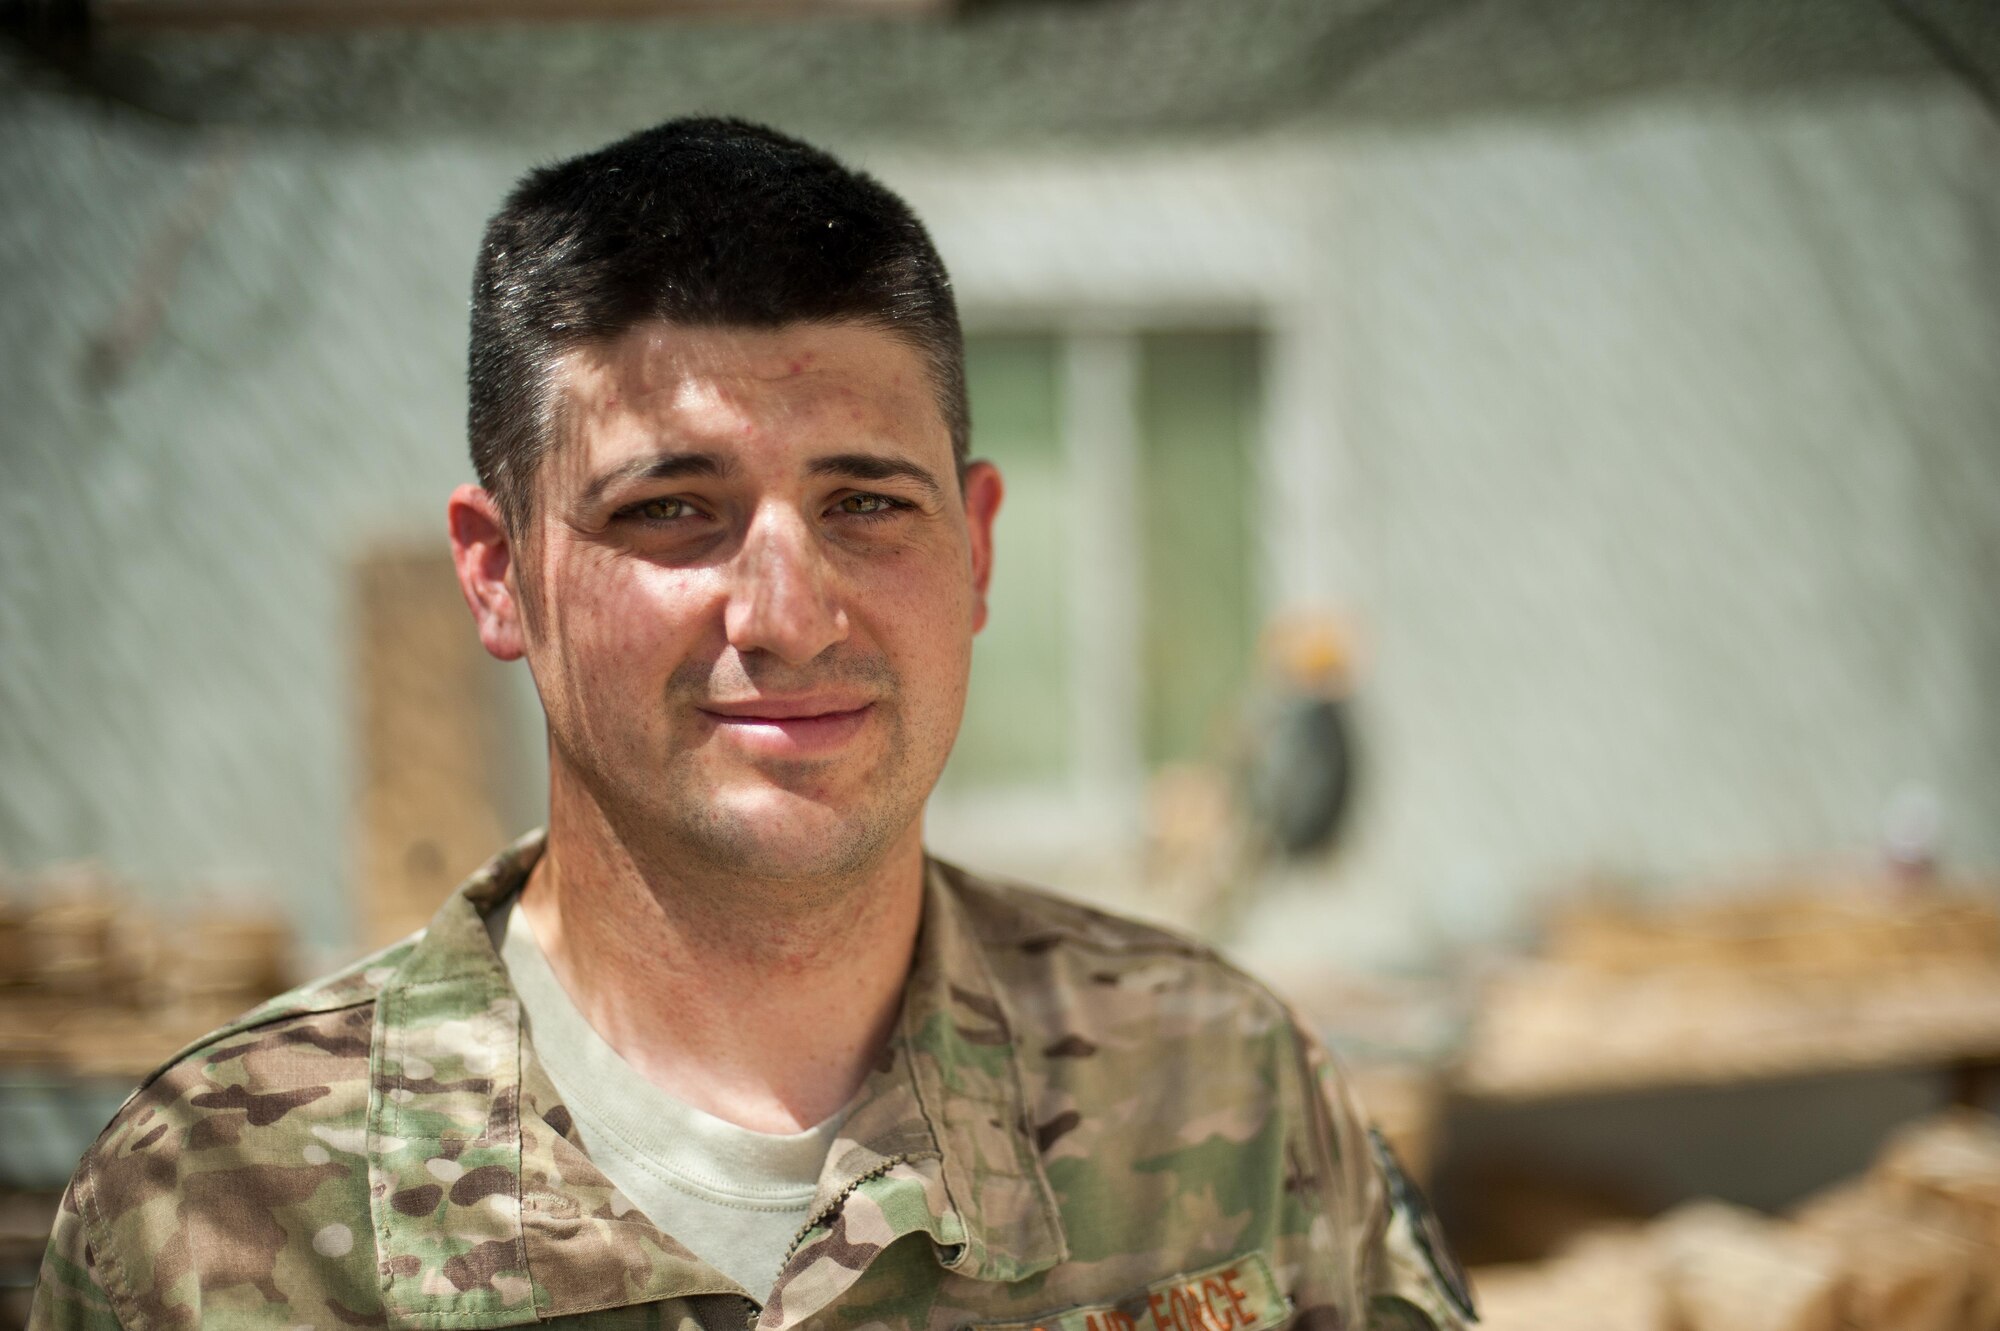 U.S. Air Force Tech. Sgt. Dallan Livingston, 451st Expeditionary Support Squadron Central Command Material Recovery Element air transportation specialist, poses for a photo after building a set of stairs for a defensive fighting position at Kandahar Airfield, Afghanistan, Aug. 15, 2015.  Livingston has been using his carpentry skills during his spare time to build projects to better KAF. (U.S. Air Force photo by Tech. Sgt. Joseph Swafford/Released)